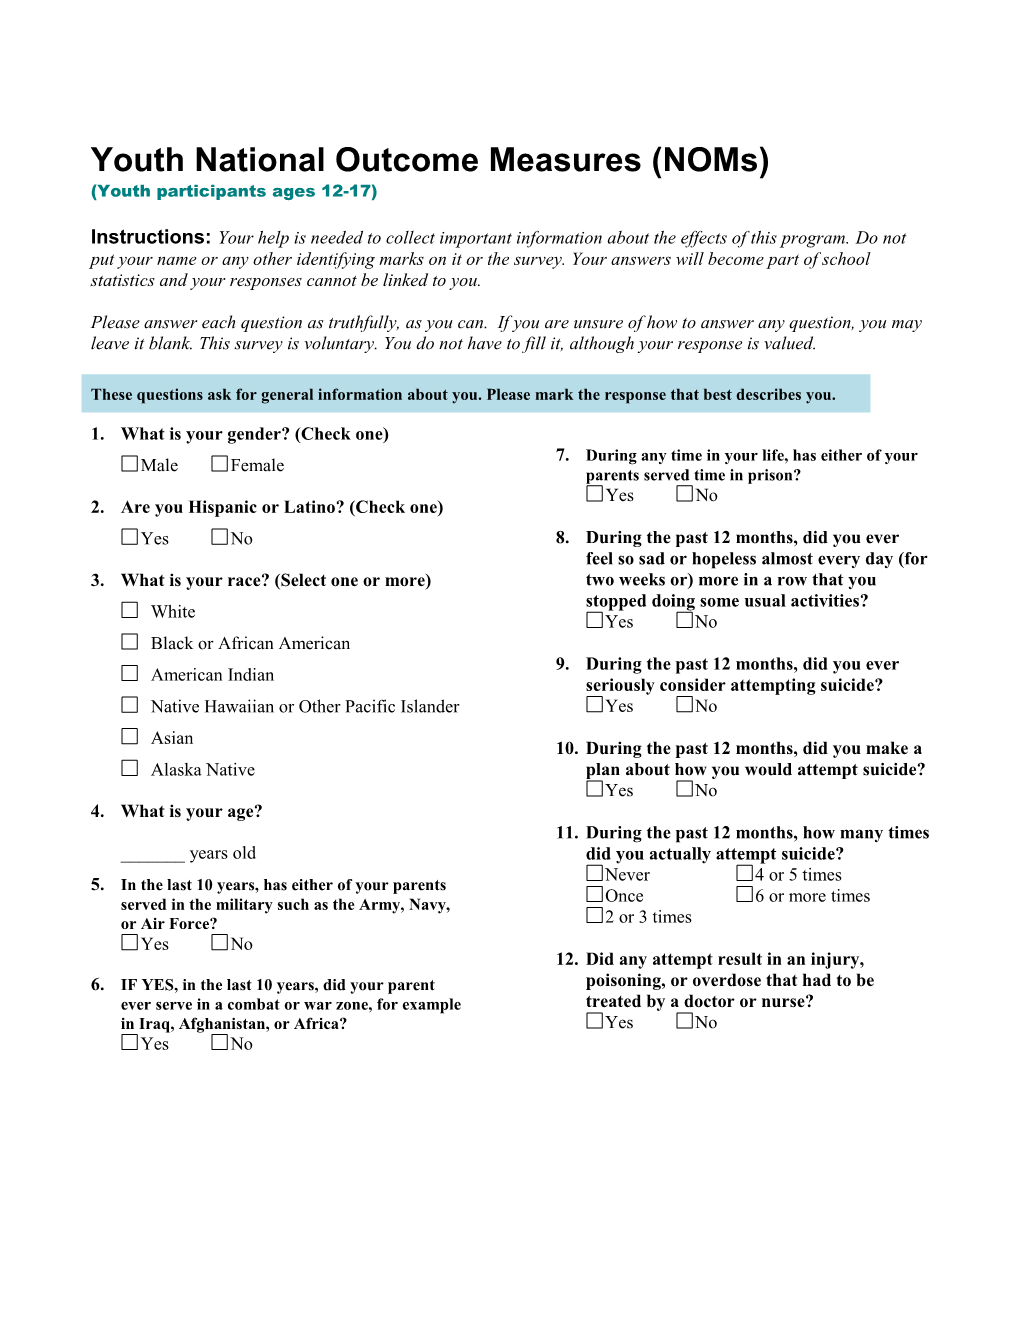 Youth National Outcome Measures (Noms)